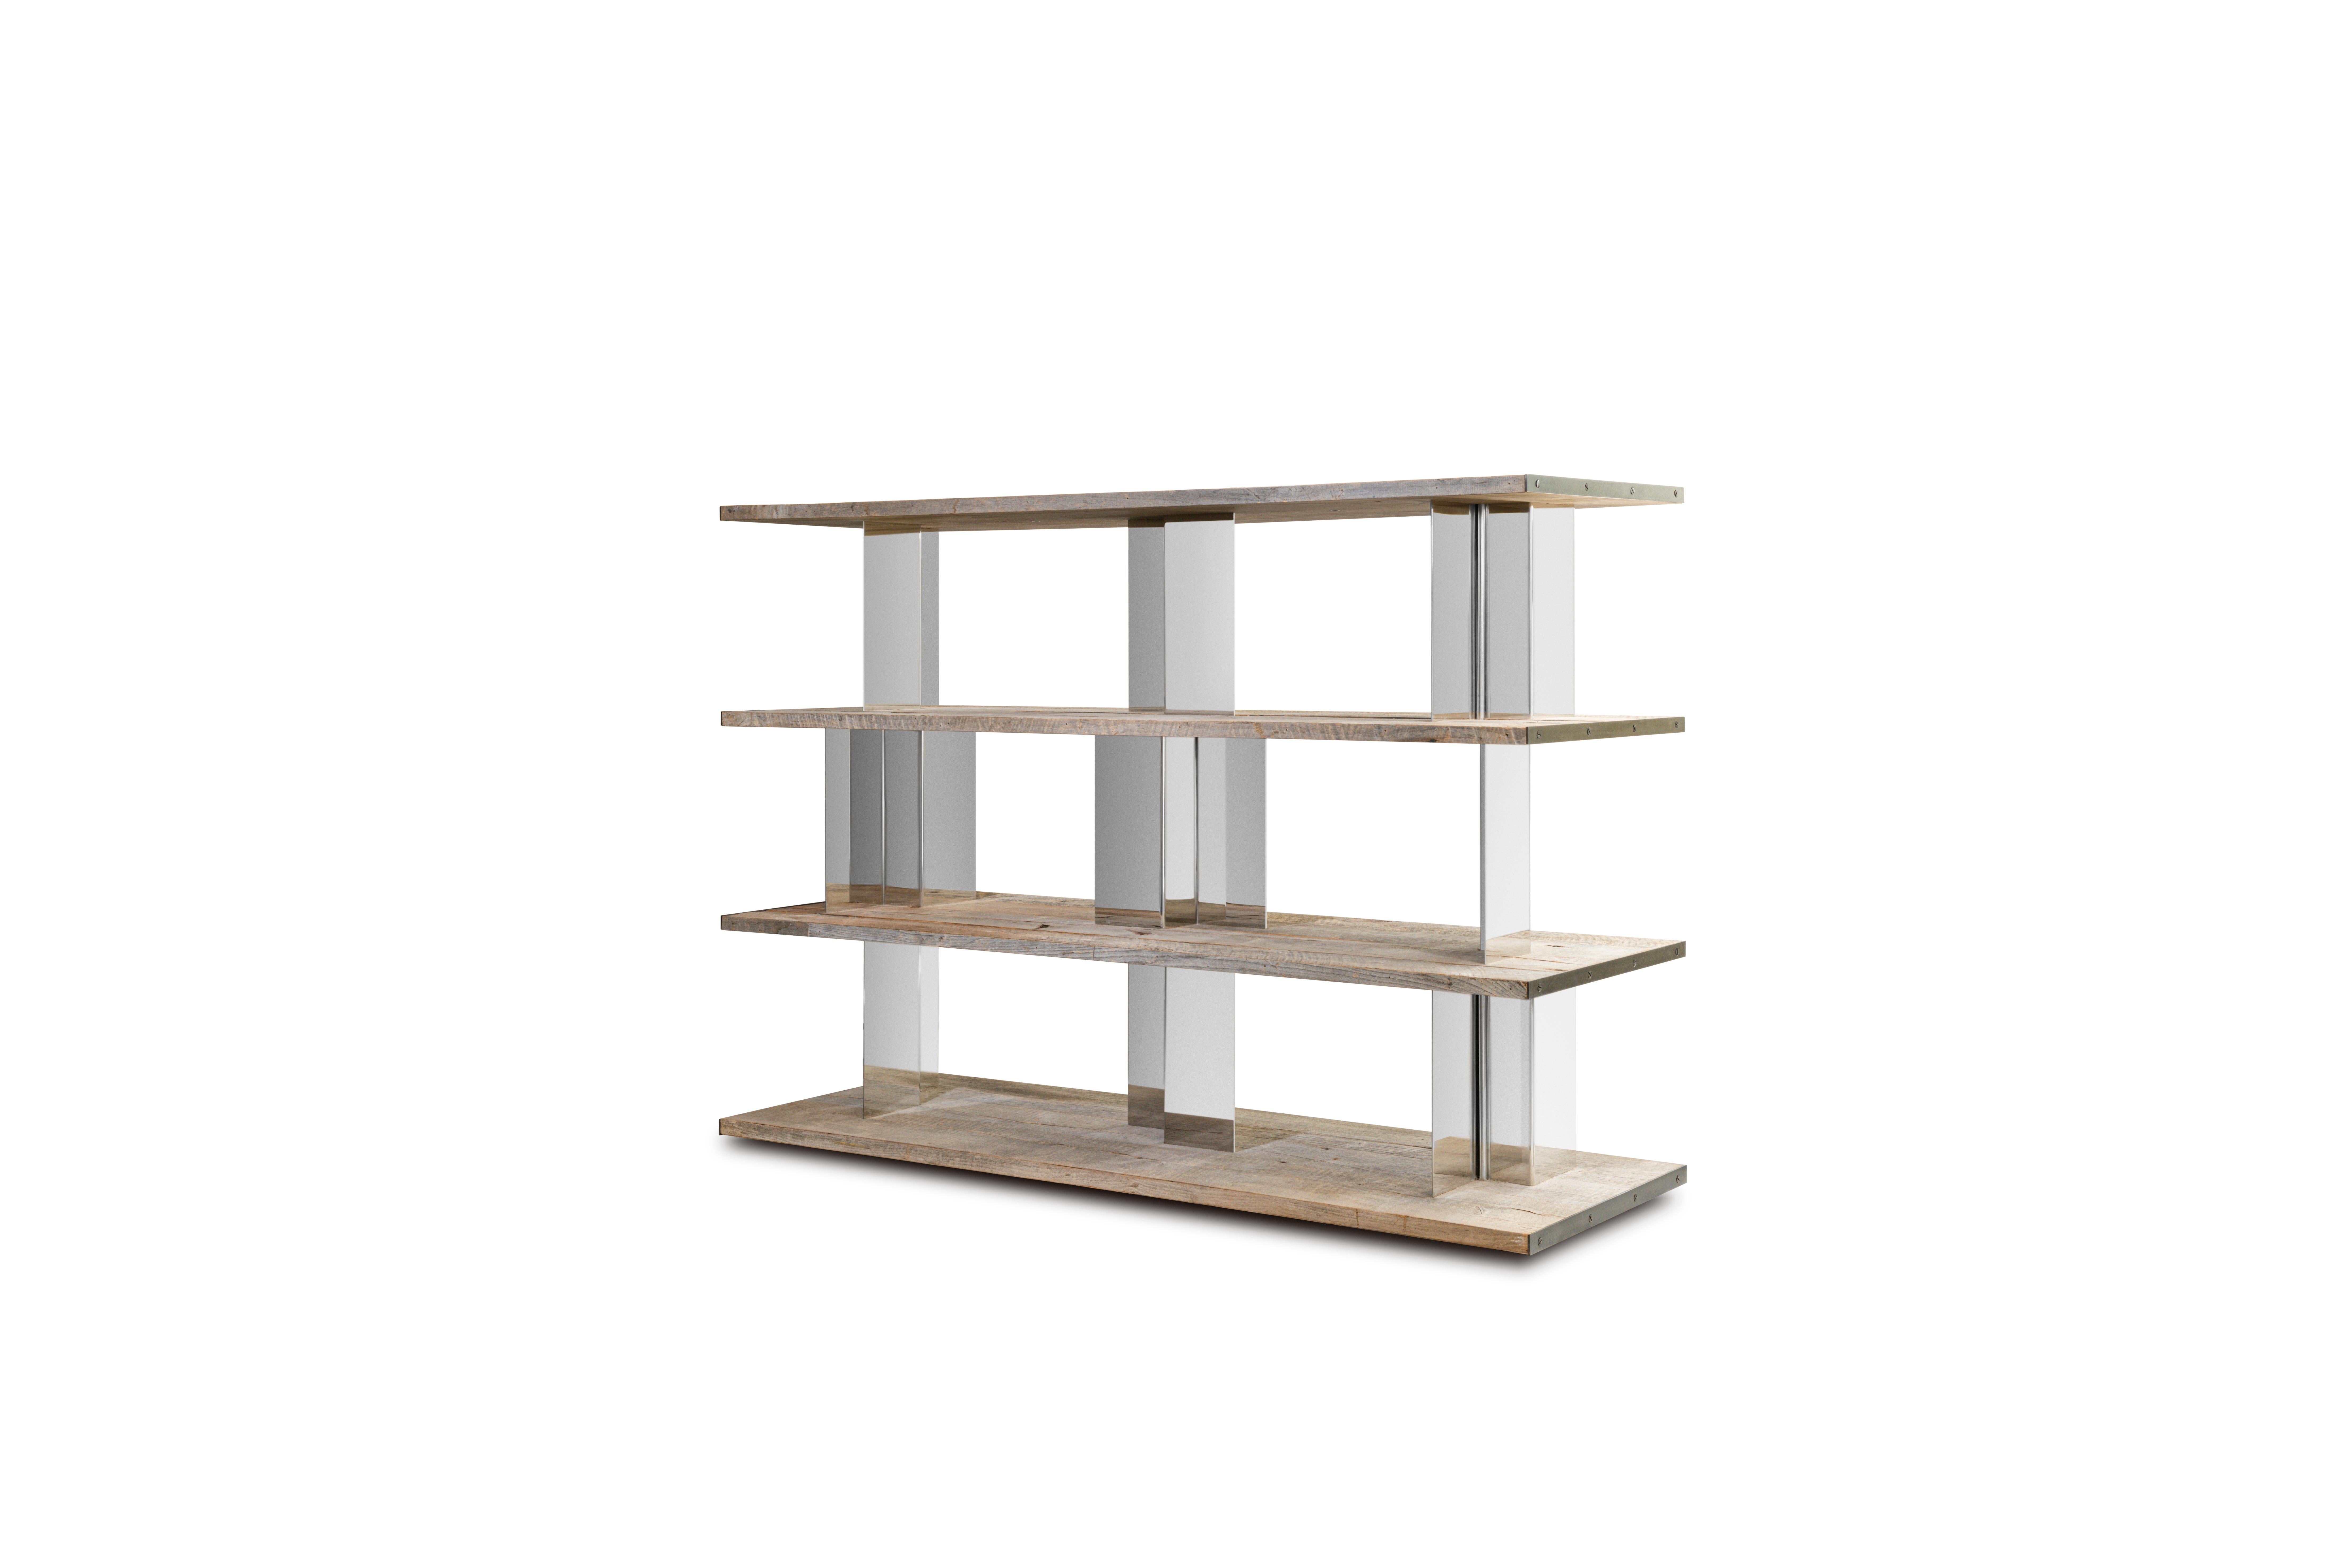 Legere bookshelf by Delvis Unlimited
Dimensions: D 45 x W 135 x H 100 cm 
Material: Alder wood, chromed sheet metal.
Designed by Oliver Thomas Wall.

The lightness of the structure is the outstanding feature of this library made with heavy